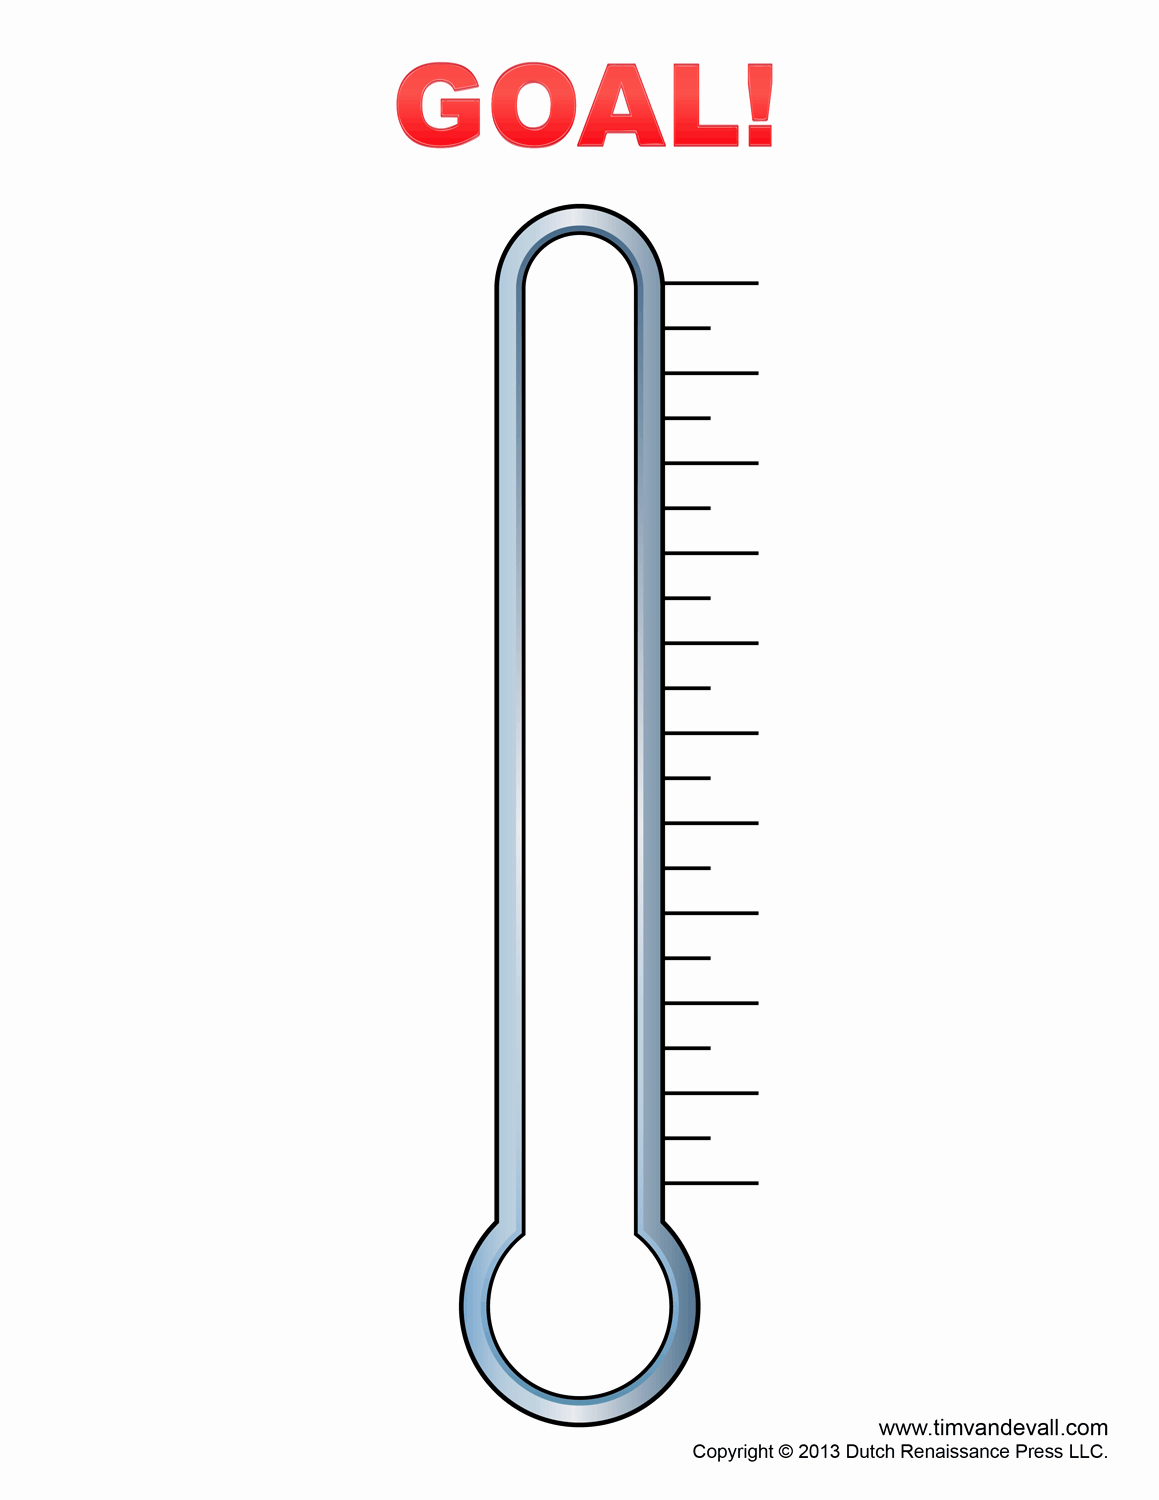 Goal thermometer Template Excel Beautiful Fundraising thermometer Template for J